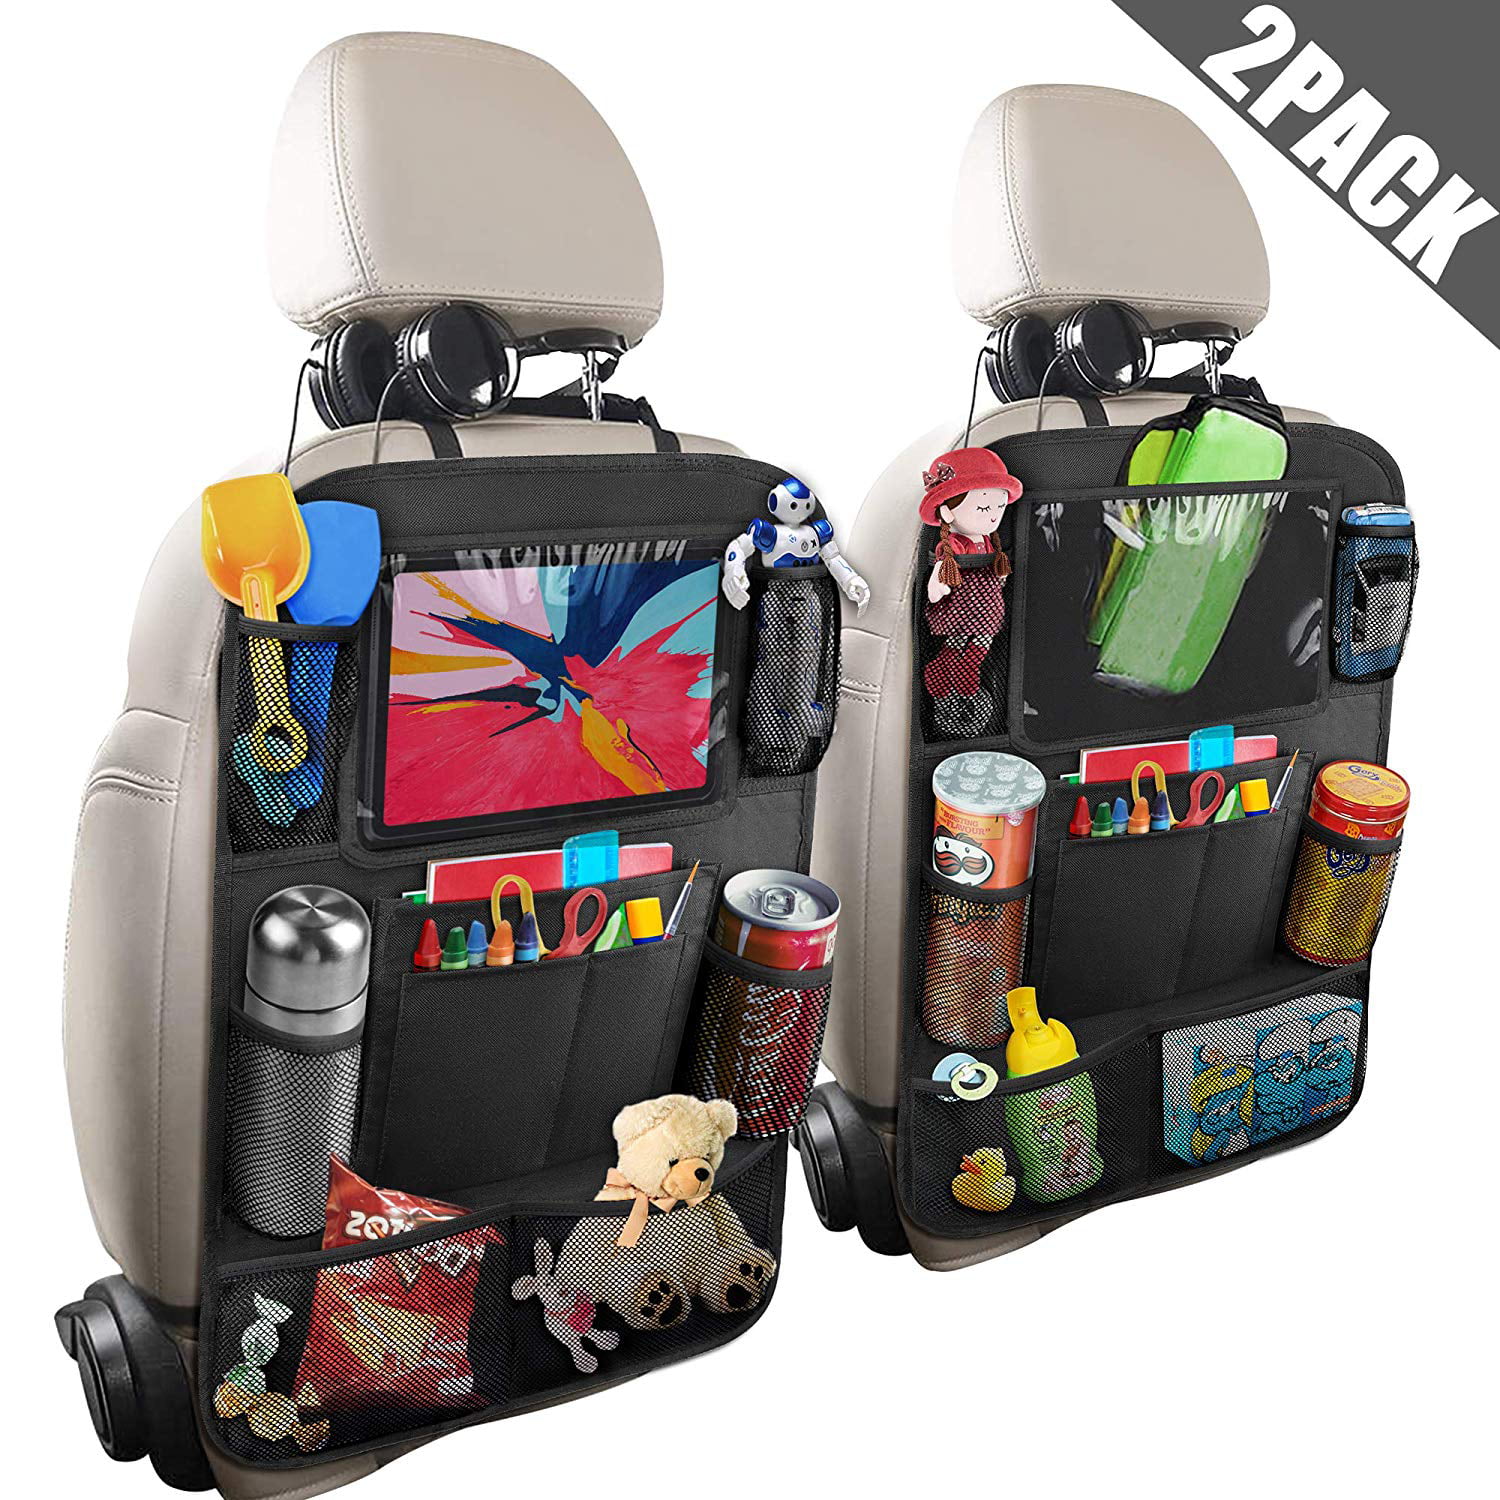 Car Back Seat Organizer PU Leather with Foldable Table Tray Car Organizer with Tissue Box/Cup/Umbrella Holder Kick Mats Car Backseat Organizer Protector Universal Use for Kids Car Travel Accessories 